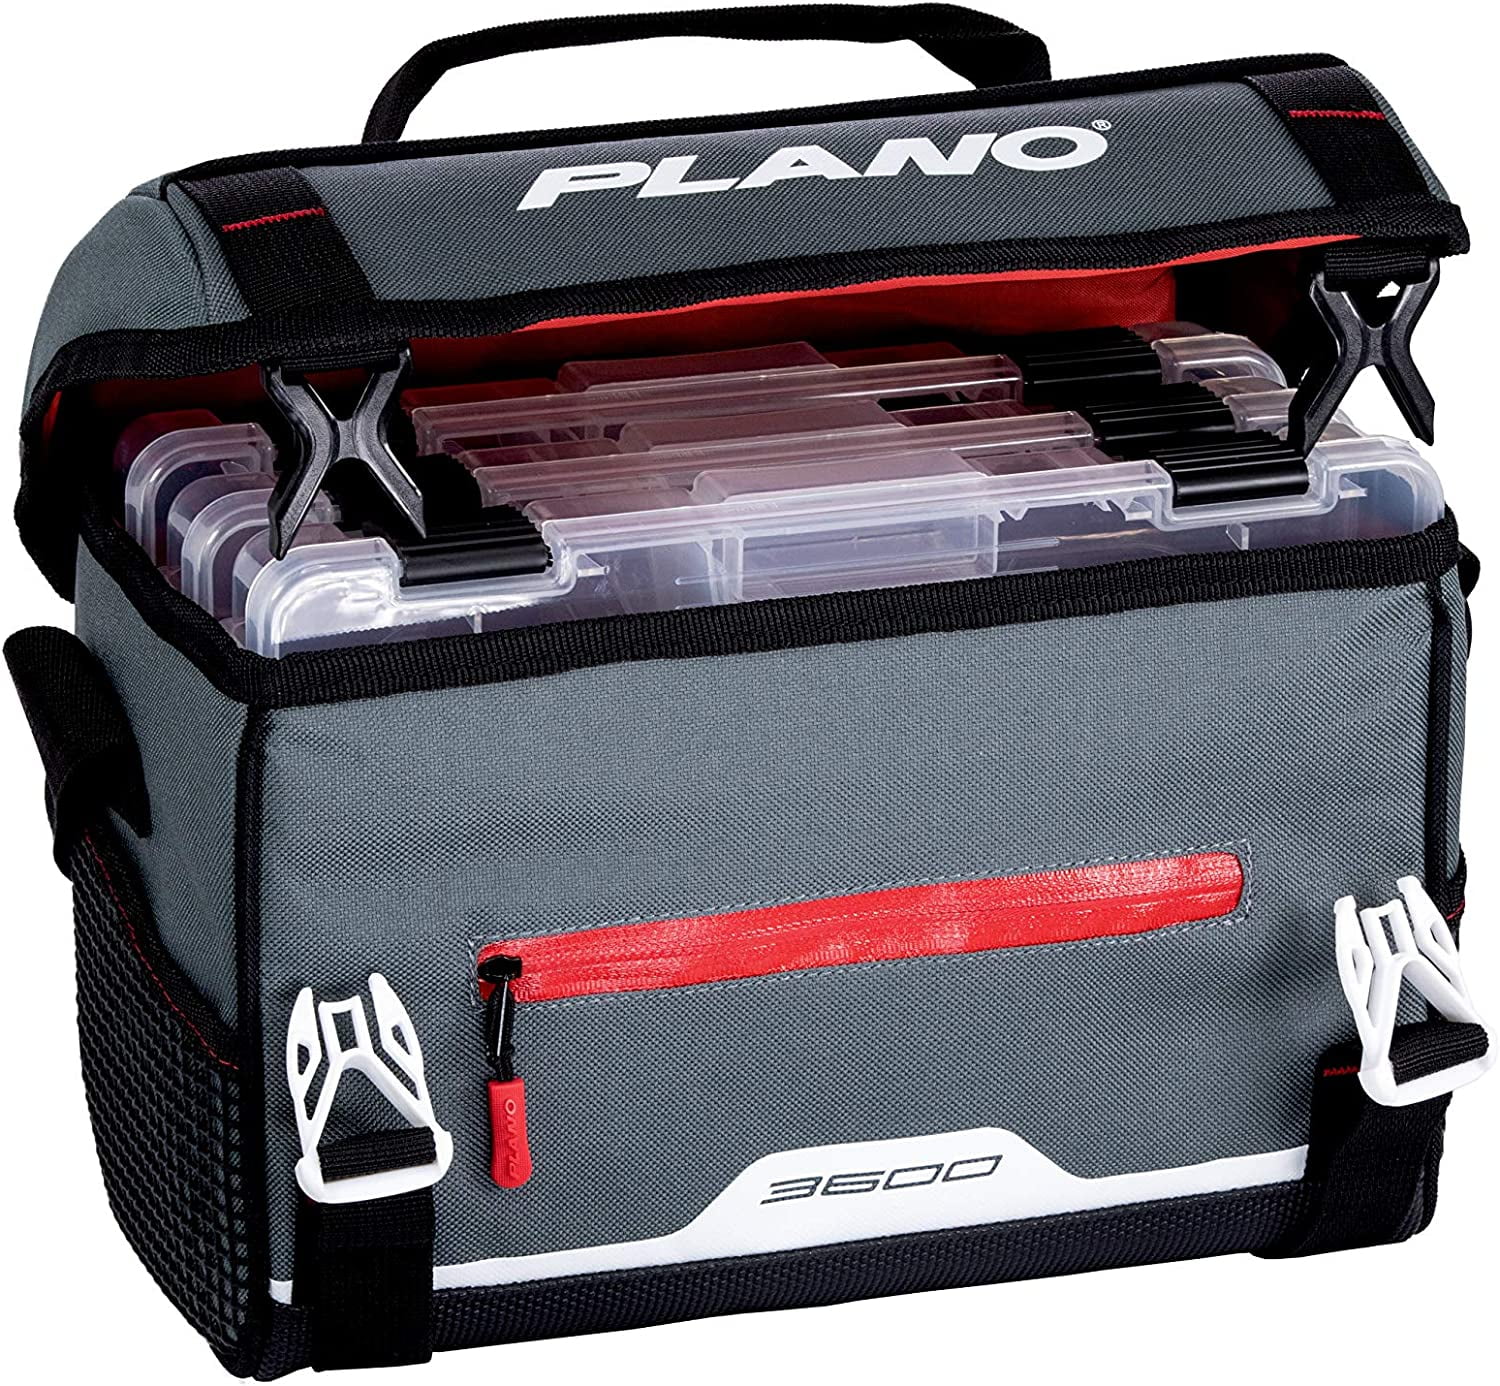 Plano Weekend Series 3600 Softsider Tackle Bag, Includes 2 Stow